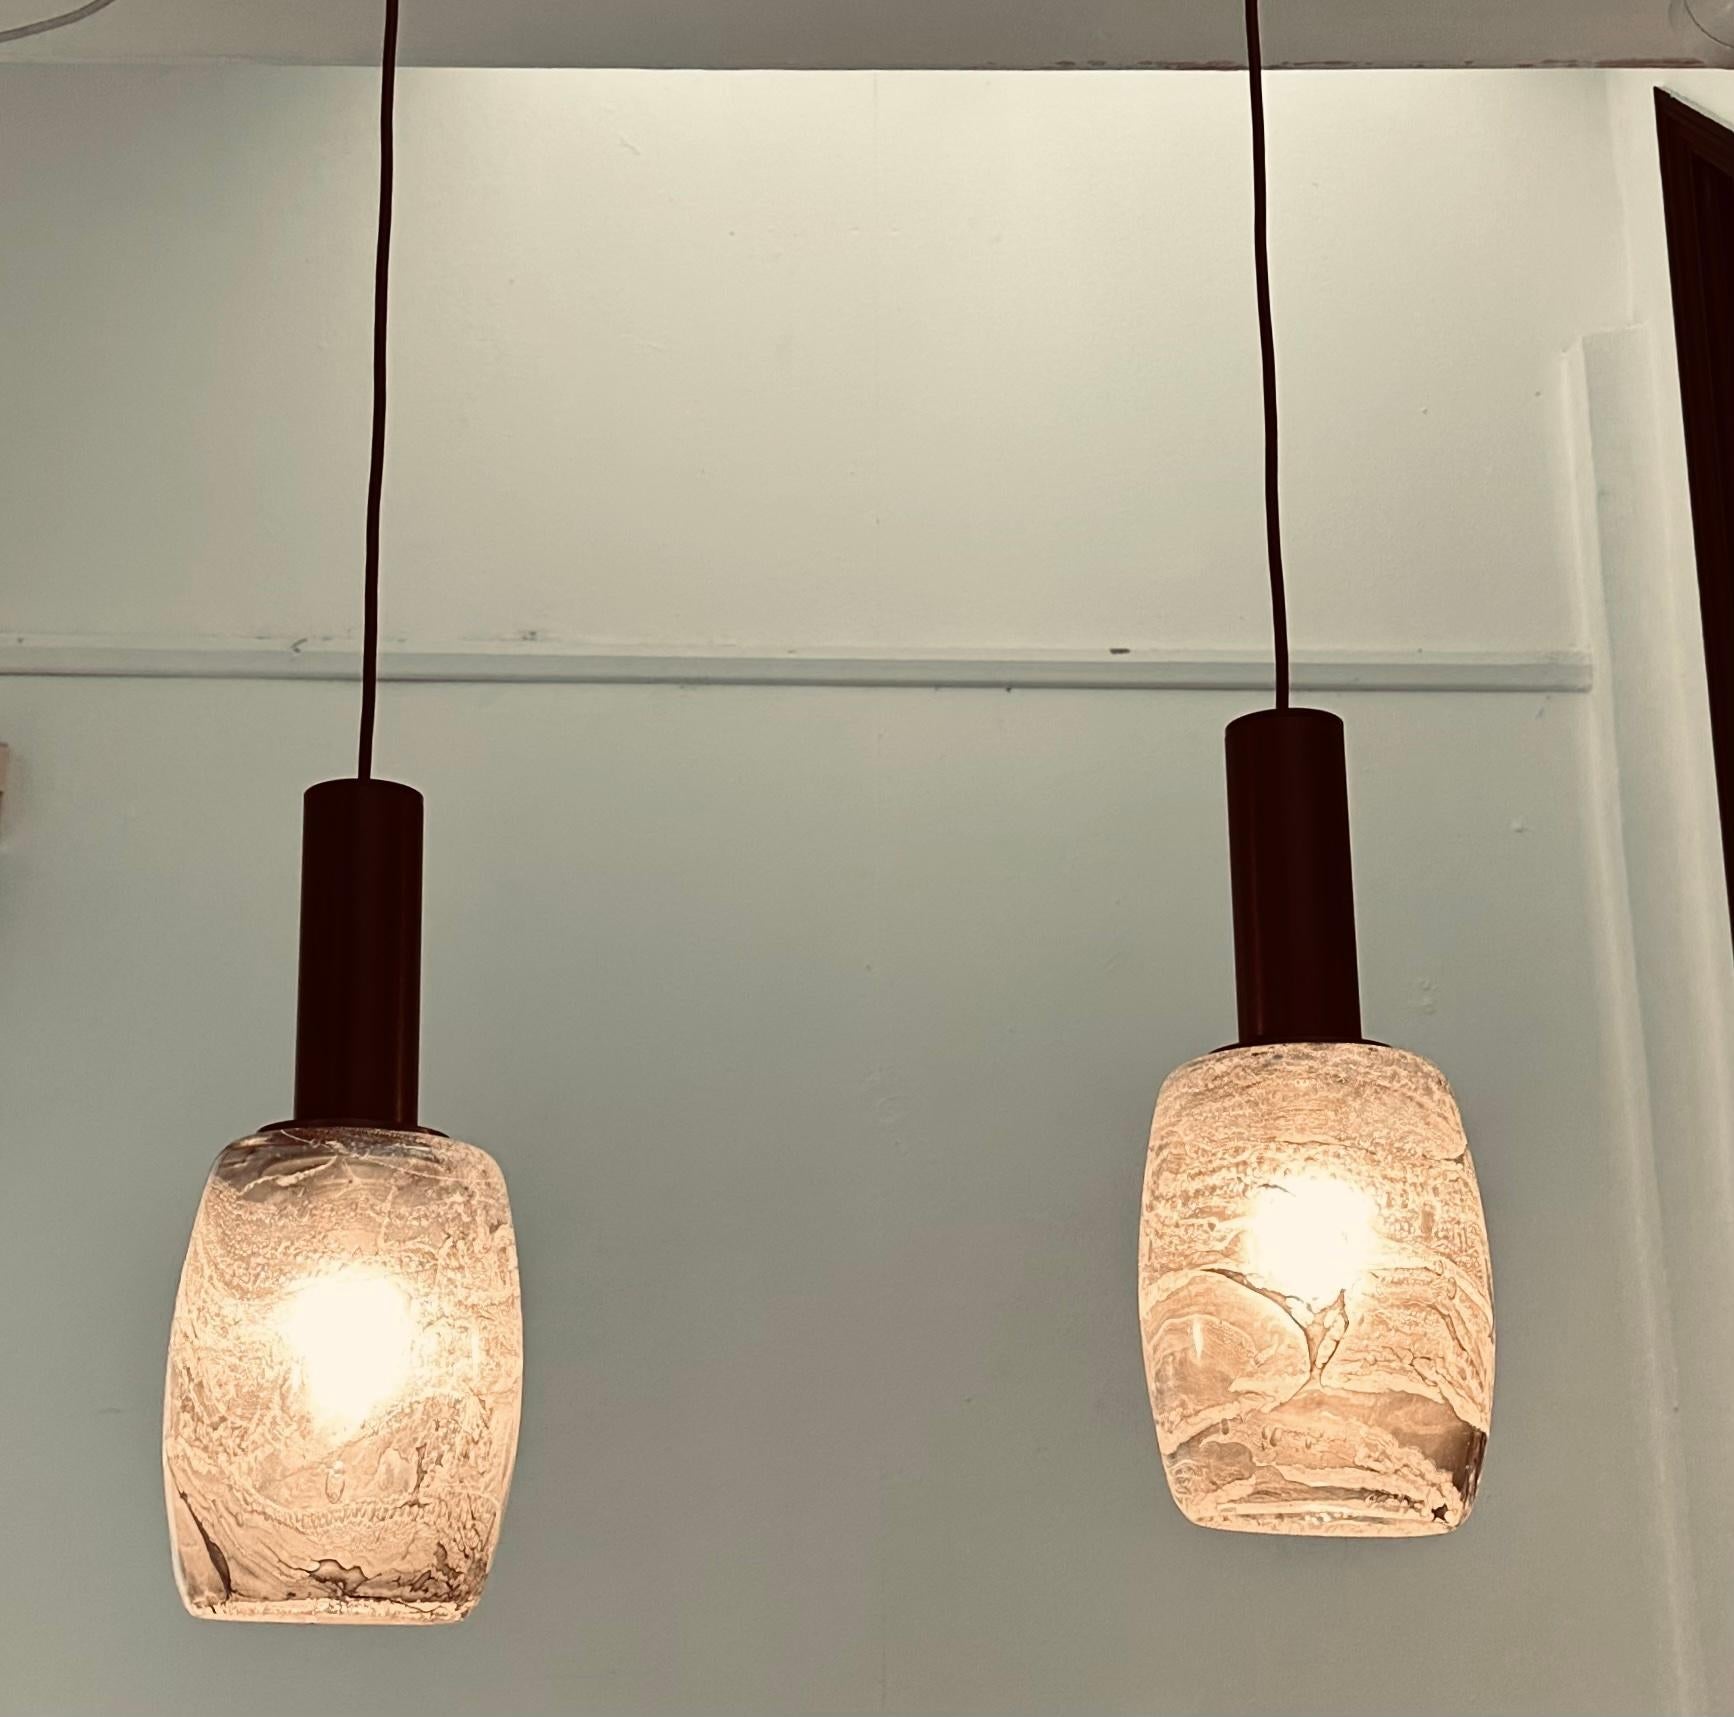 Pair of grey, white and black marbled effect hanging pendant ceiling lights manufactured in Germany by Peill & Putzler during the 1970s.  The thick hand blown glass shades with black metal fittings are suspended from height adjustable black wire